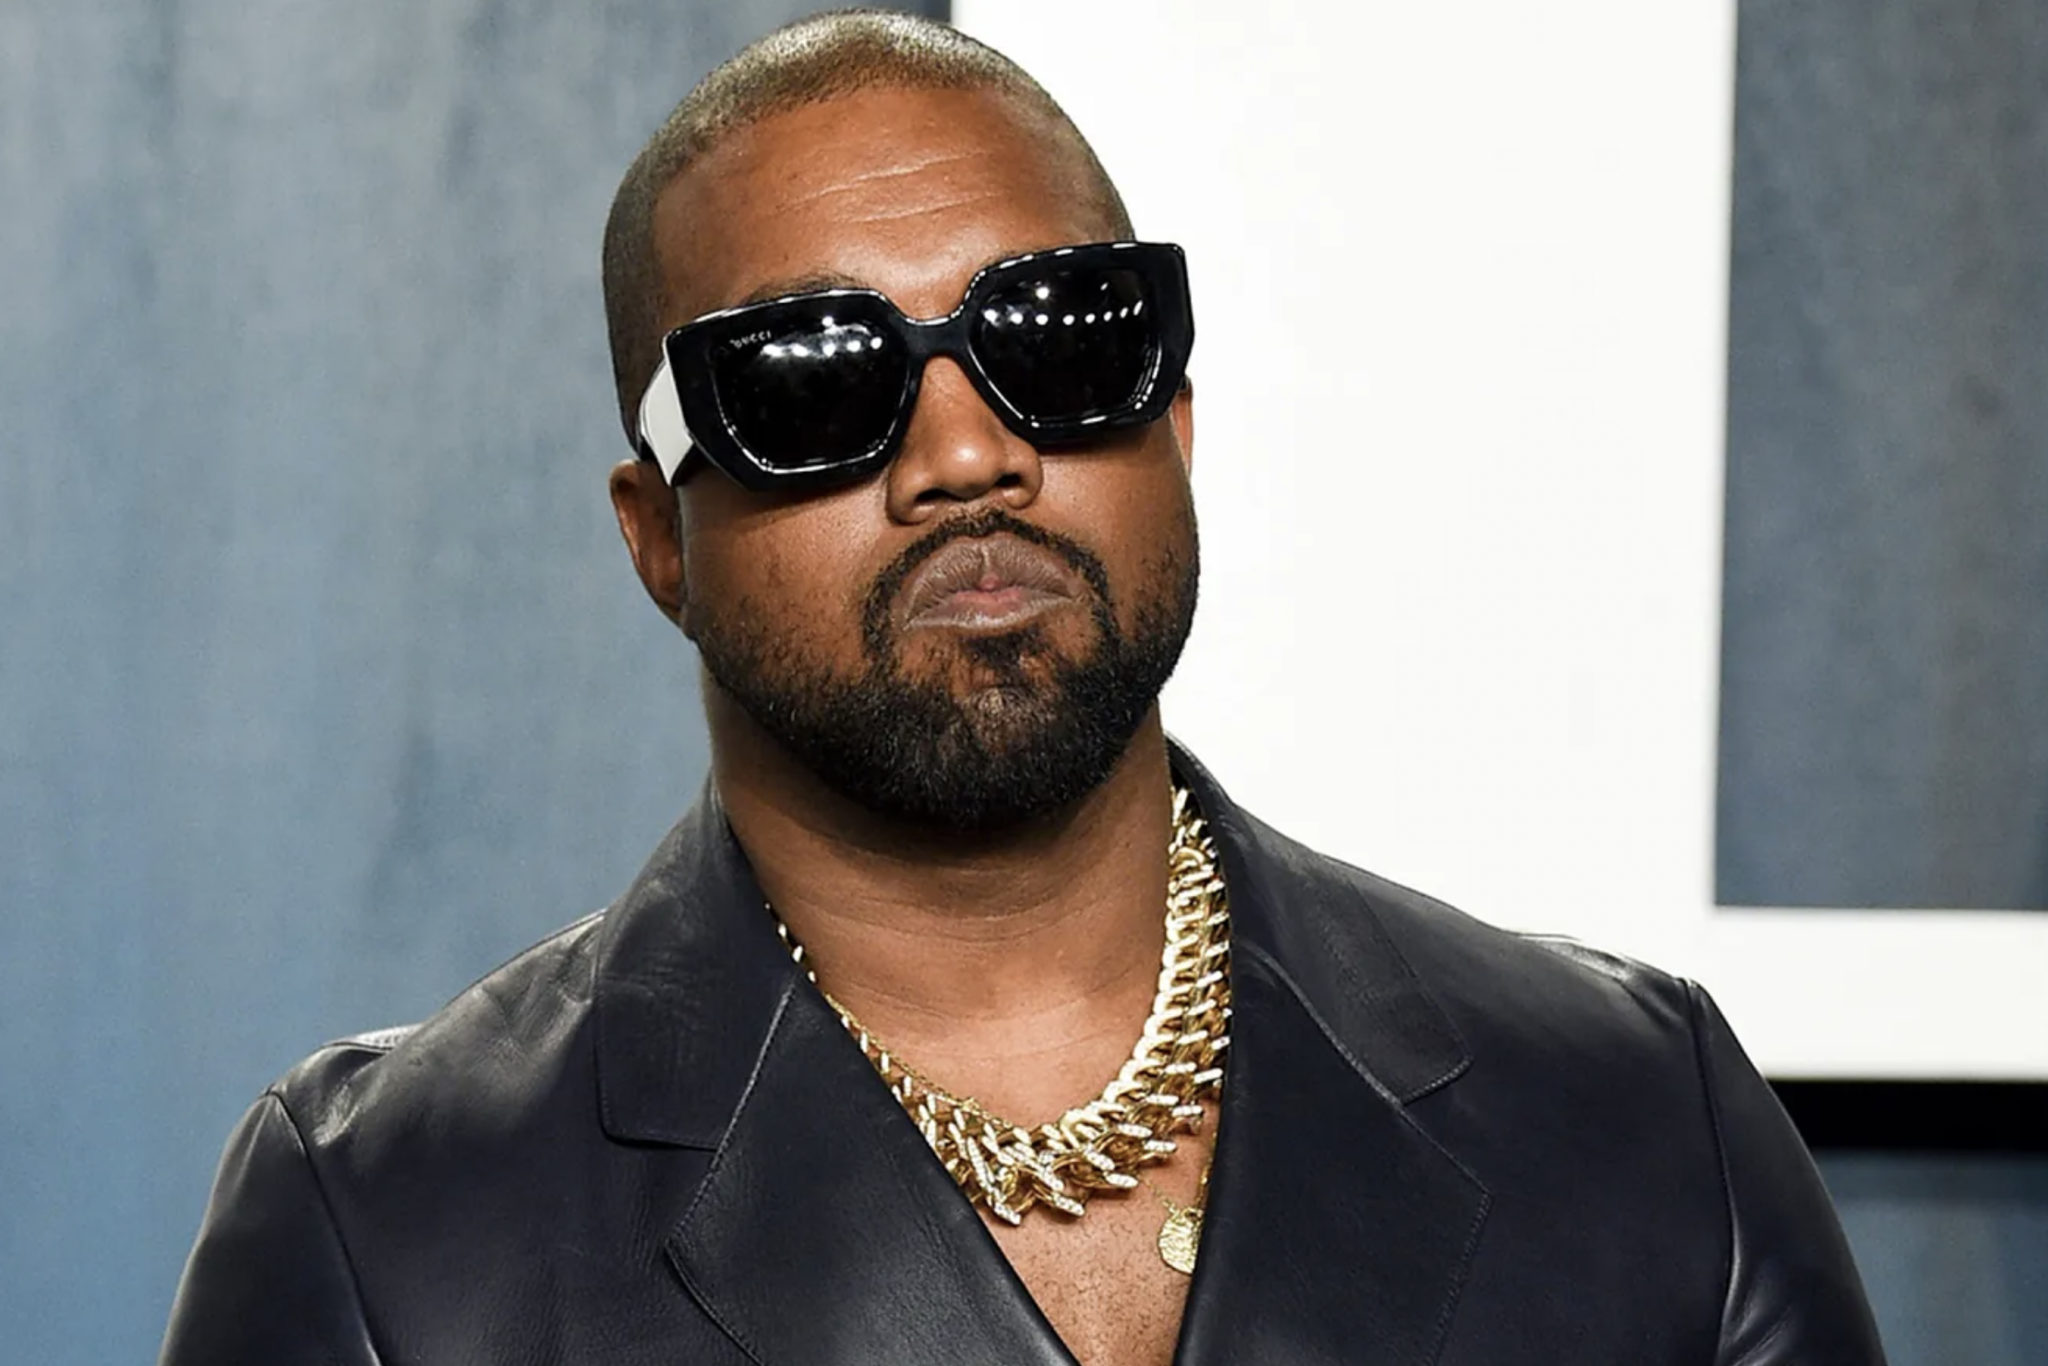 Kanye West and Bianca Censori appear separated amid the rappers assault scandal